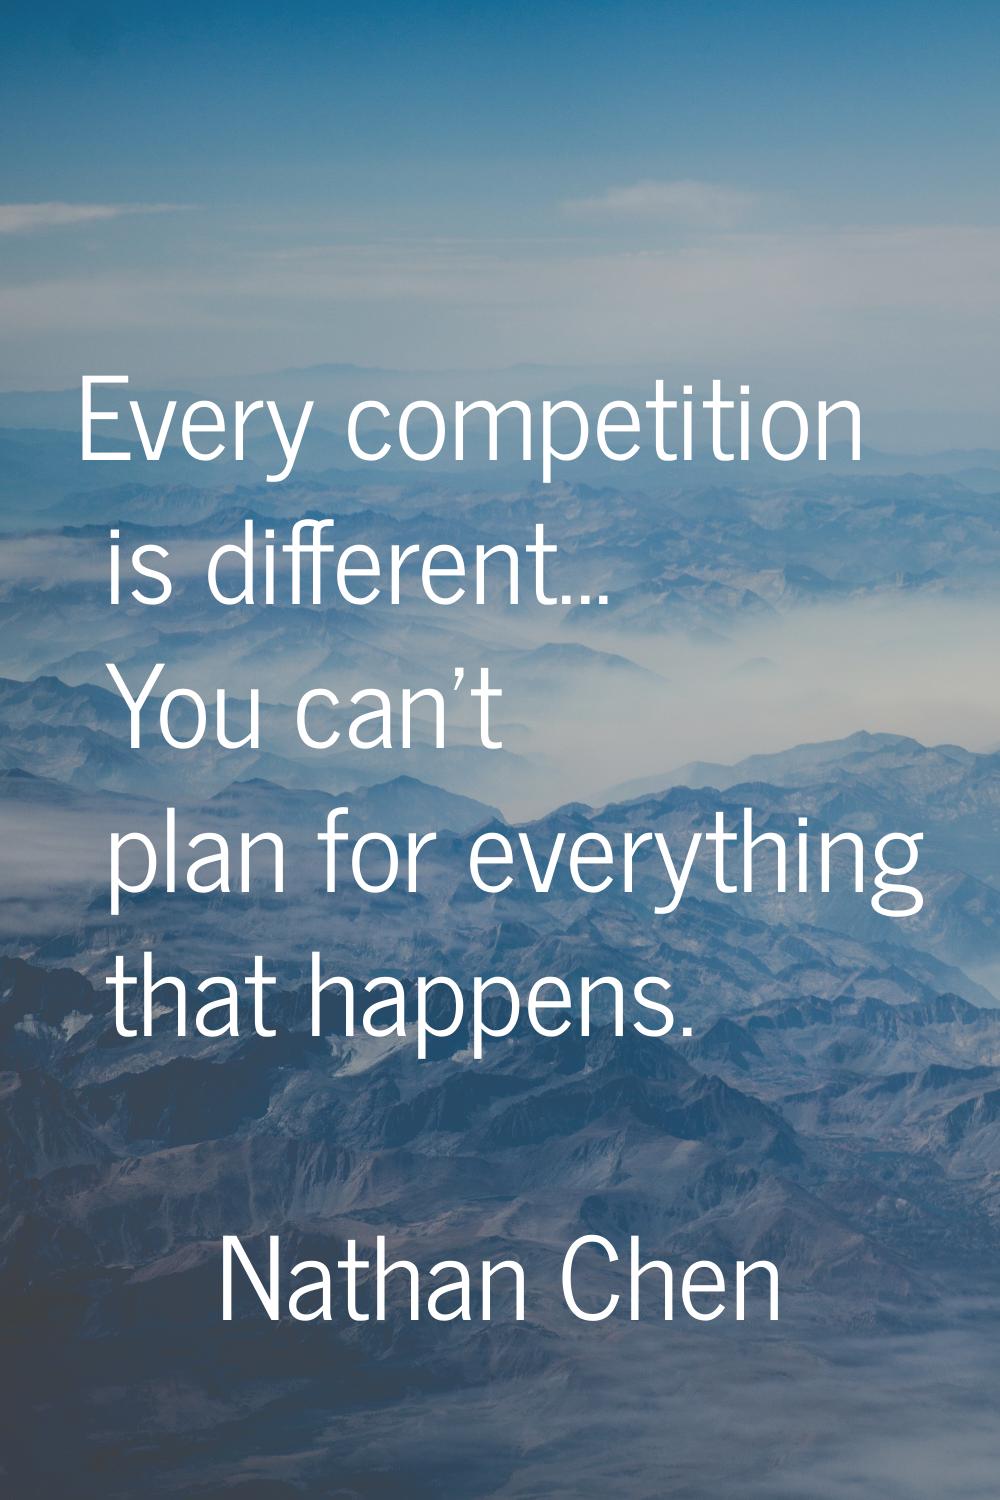 Every competition is different... You can't plan for everything that happens.